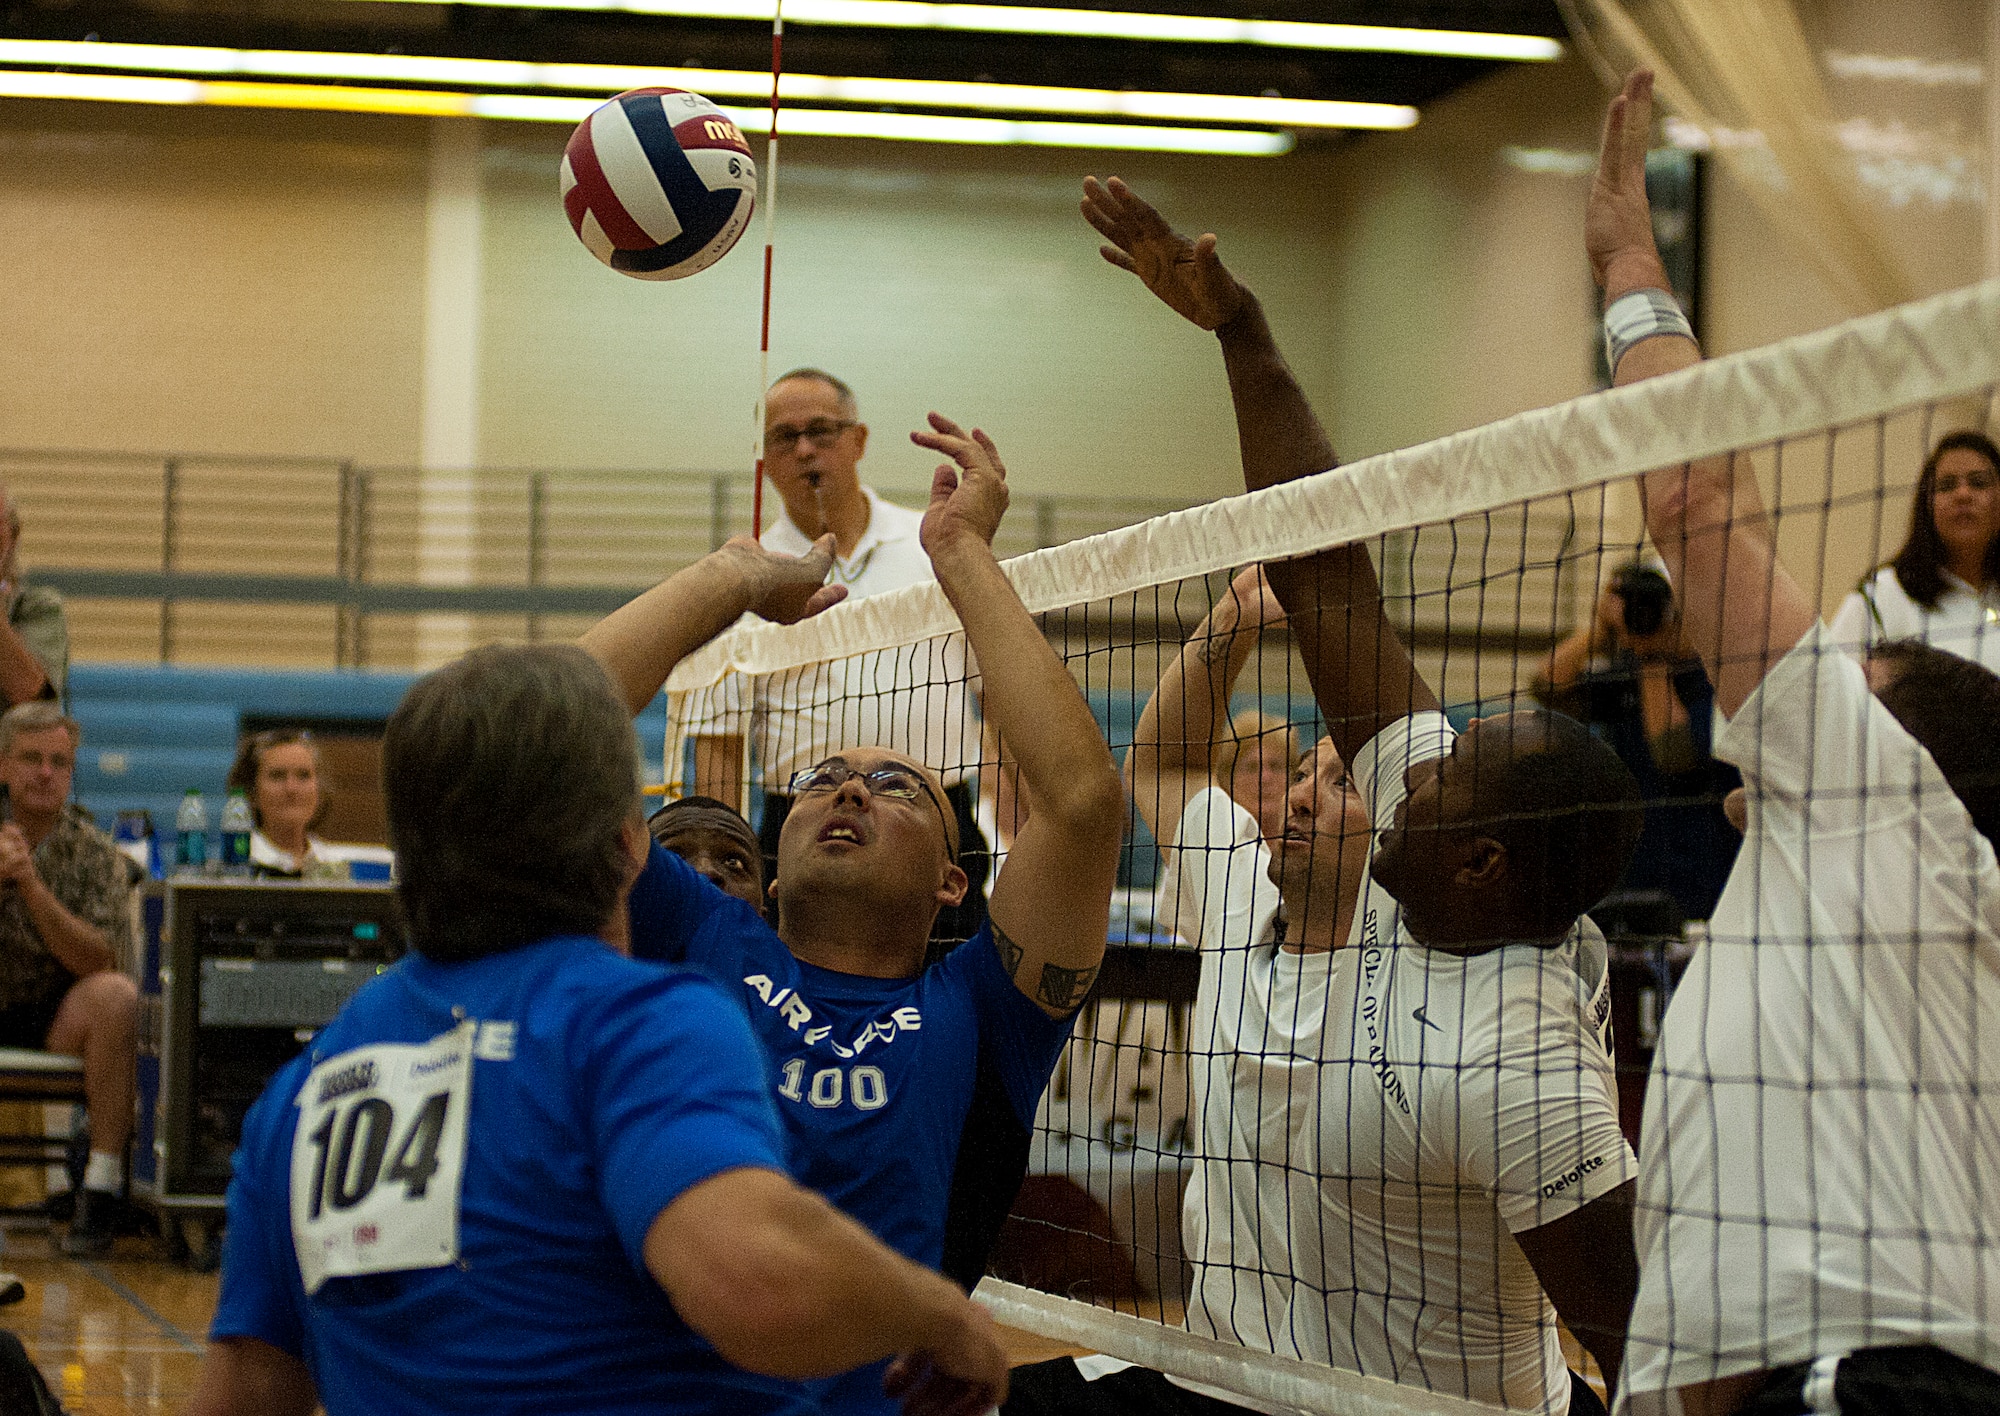 U.S. Air Force Master Sgt. Christopher Aguilera, back center, with the Air Force team, battles for the ball during his team's sitting volleyballl bronze medal game against the Special Operations Command team during Warrior Games 2012 at the U.S. Air Force Academy in Colorado Springs, Colo., May 3, 2012. Air Force won 25-12 and 25-20. (U.S. Air Force photo by Val Gempis/Released)